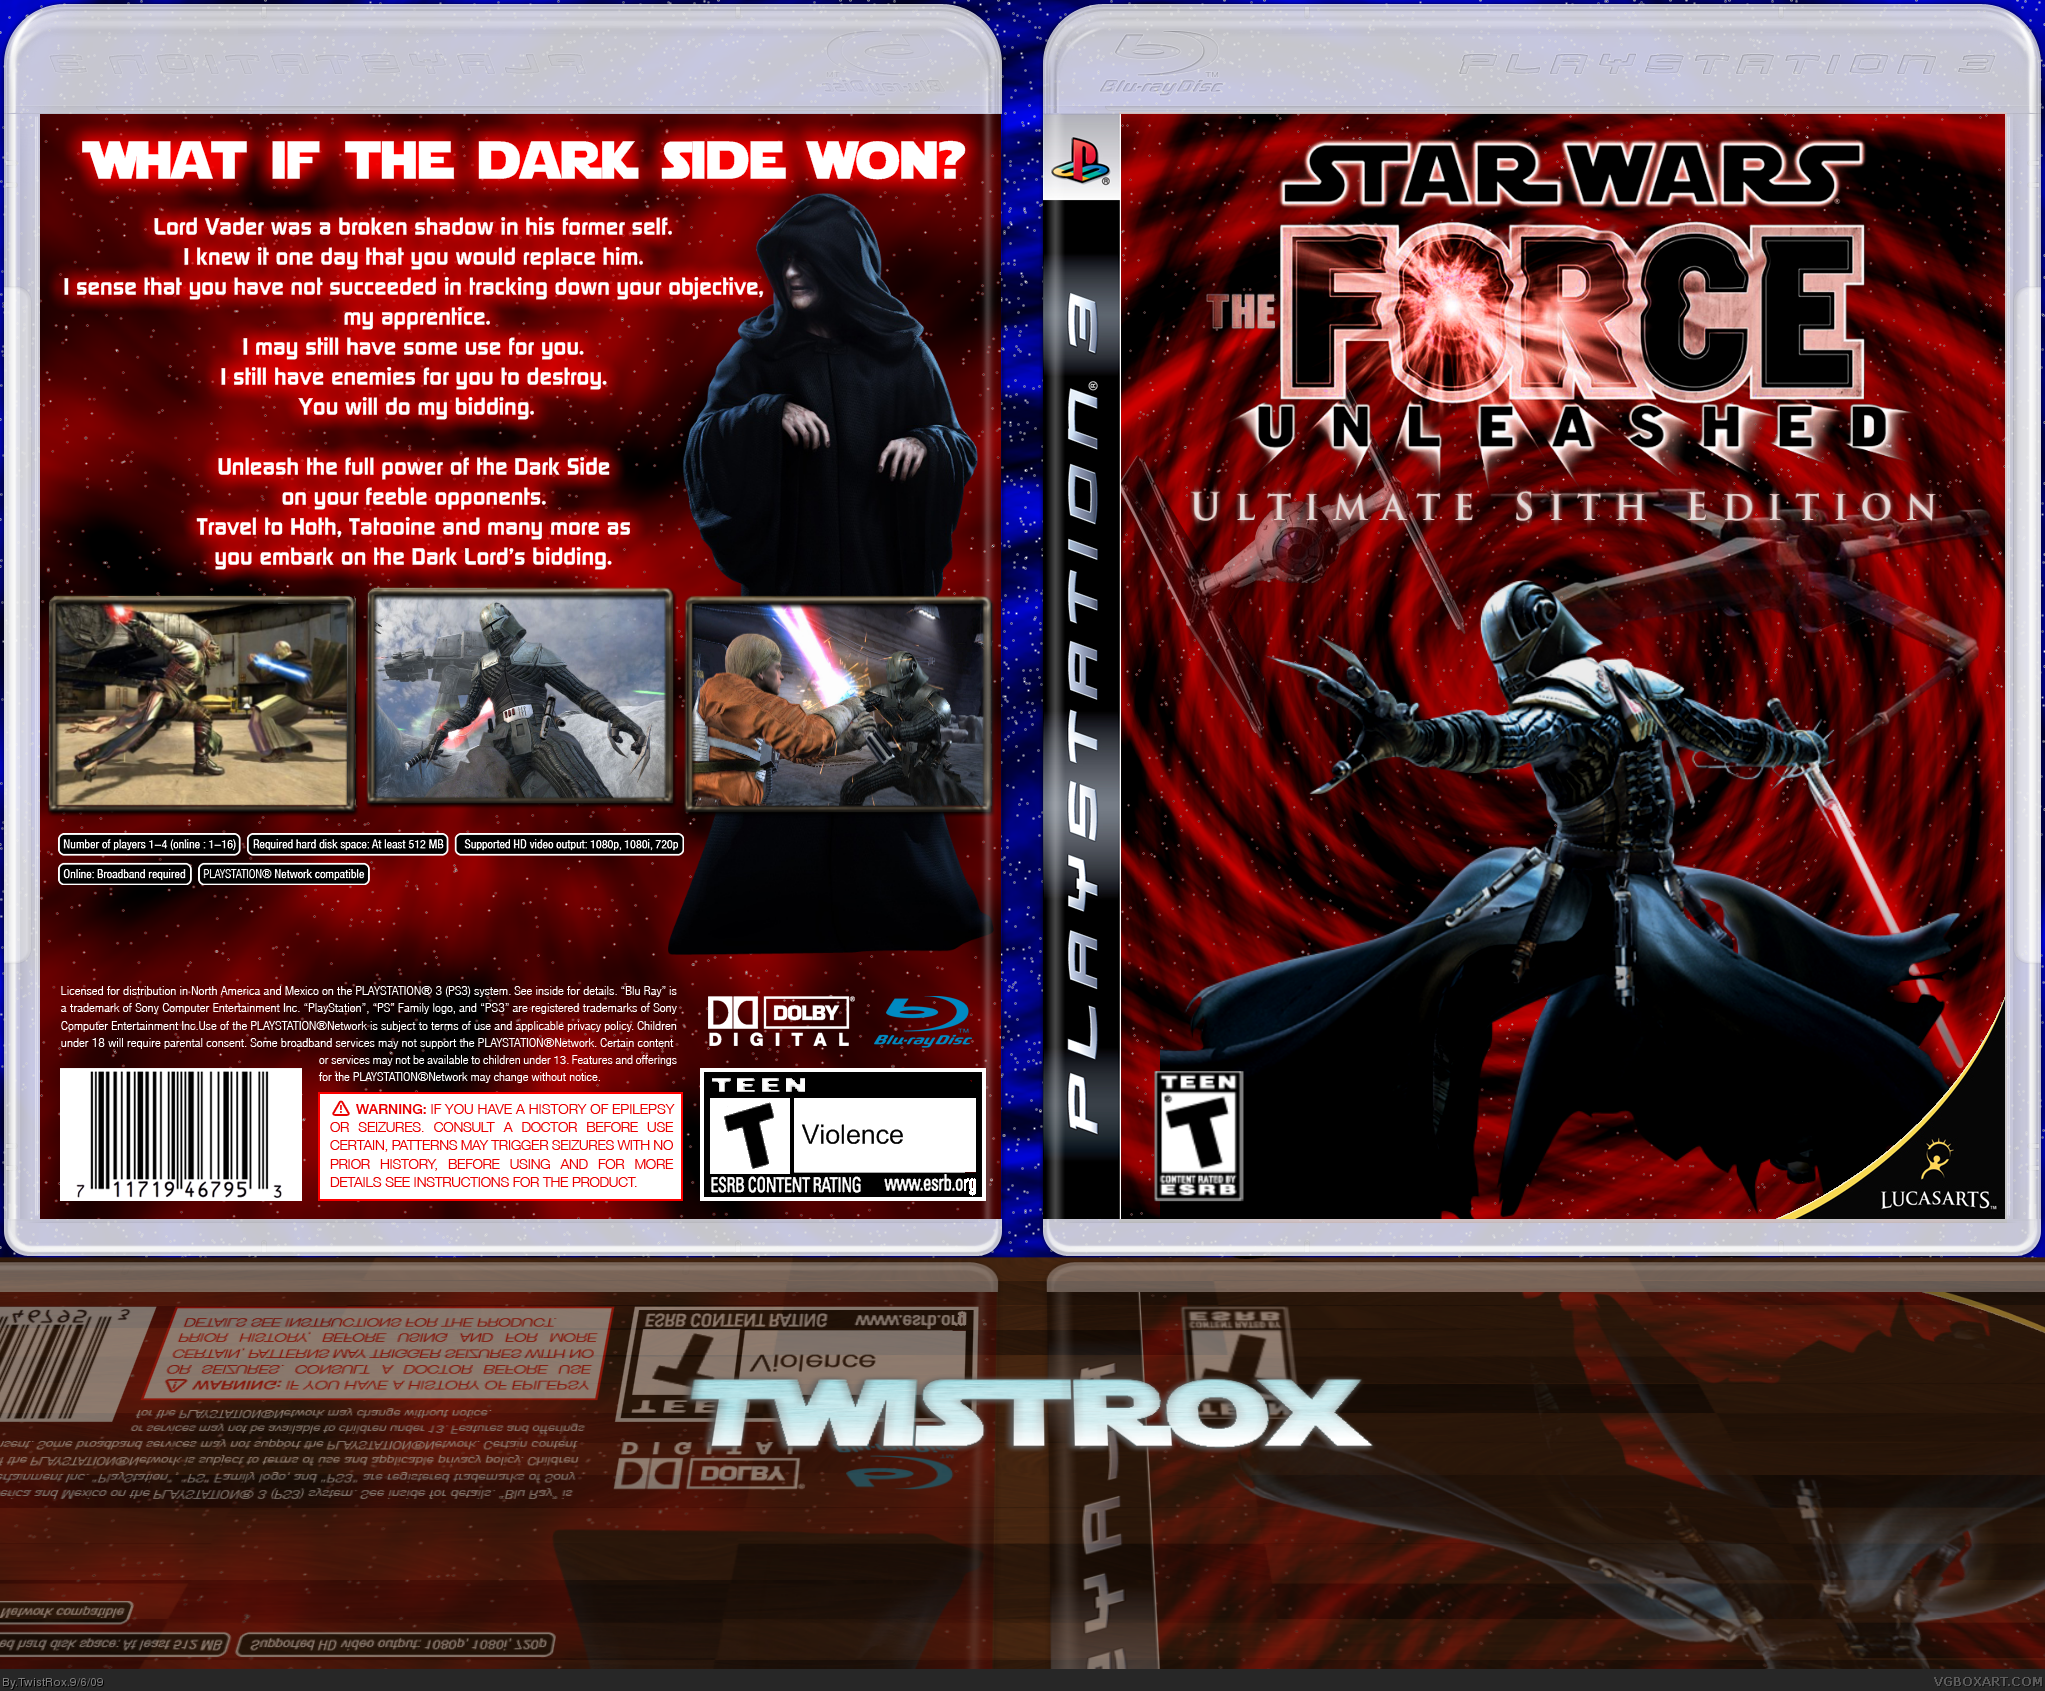 Idol rod Smoothly Star Wars: The Force Unleashed Sith Edition PlayStation 3 Box Art Cover by  TwistRox